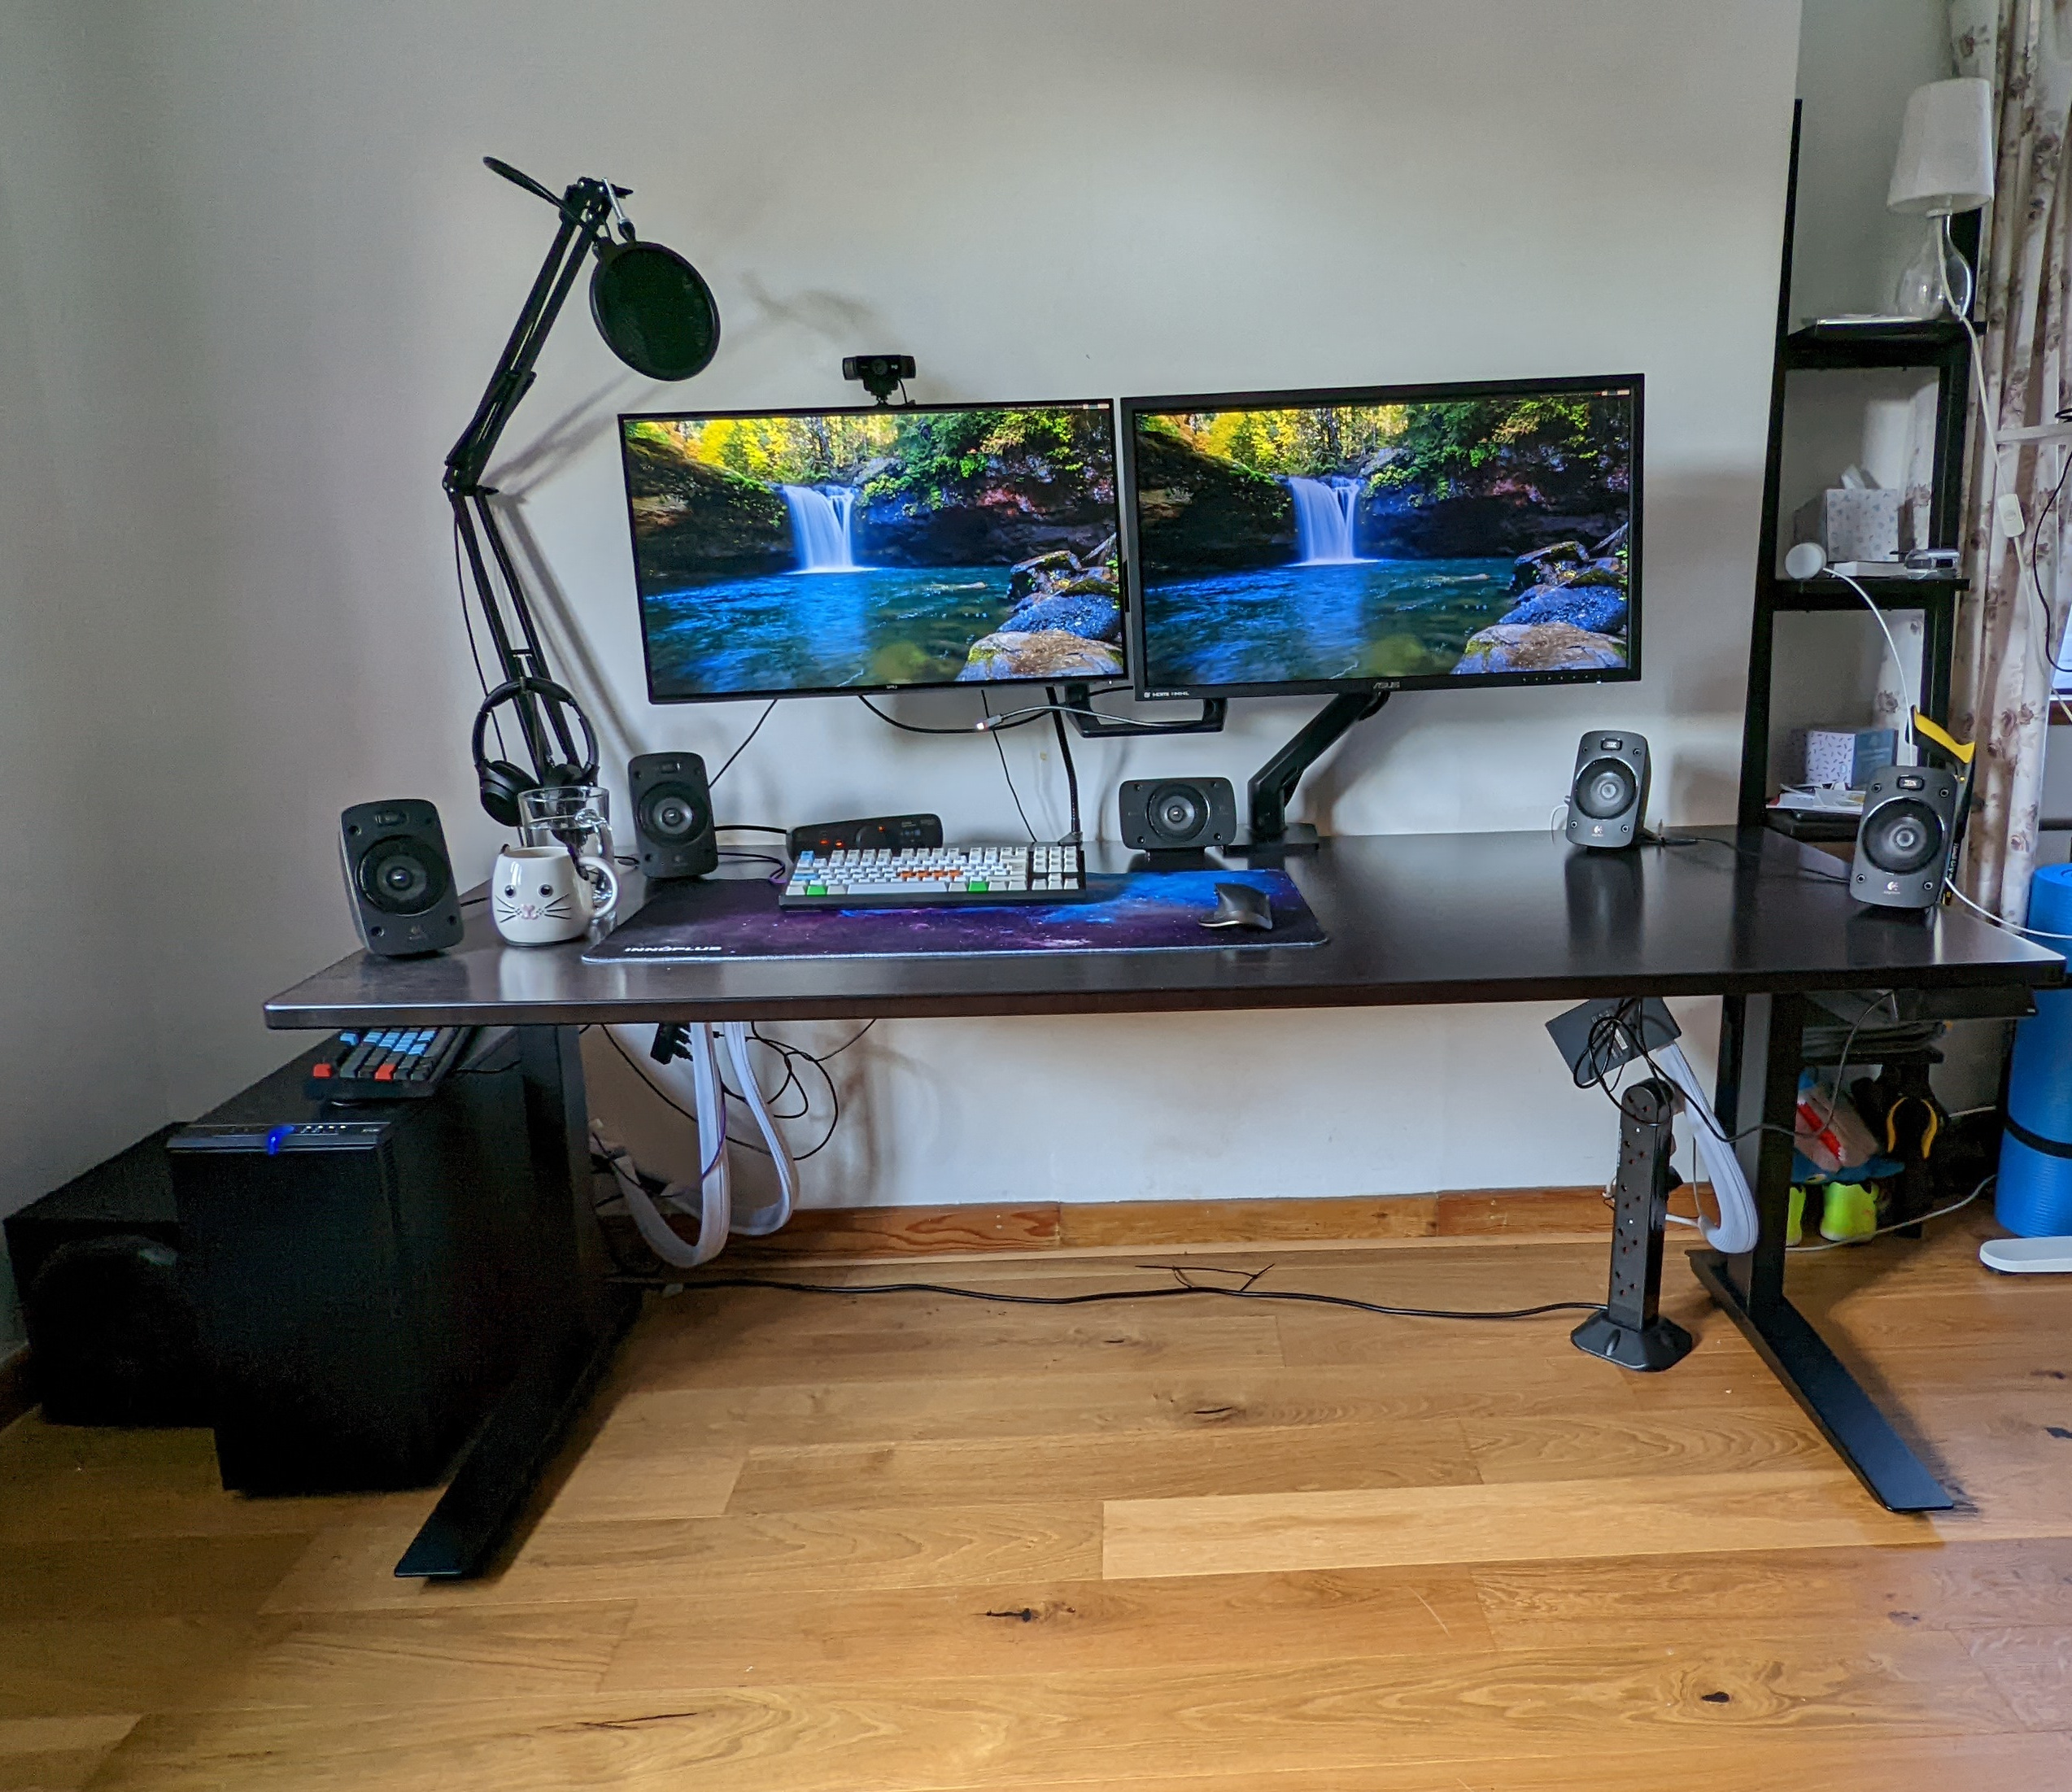 A photo of a Jamie's desk setup in "home" mode. The desk is a Fully Jarvis sit-stand desk, with a dark bamboo top and black legs. Around the desk position is a set of surround sound speakers. There is a microphone arm in the left hand side corner of the desk, and a headphones stand in front of it. On the desk, there is a nebula themed large mouse-and-keyboard pad, on top of which is a WASD Keyboard v3 keyboard (in bright white, green, orange and light blue colours), and a Logtech MX Master mouse. There are two screens, using an Ergotron dual monitor mount. The left hand side screen is a Dell UltraSharp (4k) 27" USB-C Hub Monitor - U2722DE, and the right hand side screen is an Asus PB287Q 28" 4K Monitor. Above the left hand side monitor is a Logitech C922 webcam. On both screens, the background image is a waterfall into a natural enclosed pool. Below the desk you can see an Ethernet switch on the right which unfortunately isn't yet cable tidied, as well as a USB hub that's also visible and not-yet-tidied, on the left. There is also a little bit of mess and some shelves on the right hand side of the image that couldn't be cropped out easily.